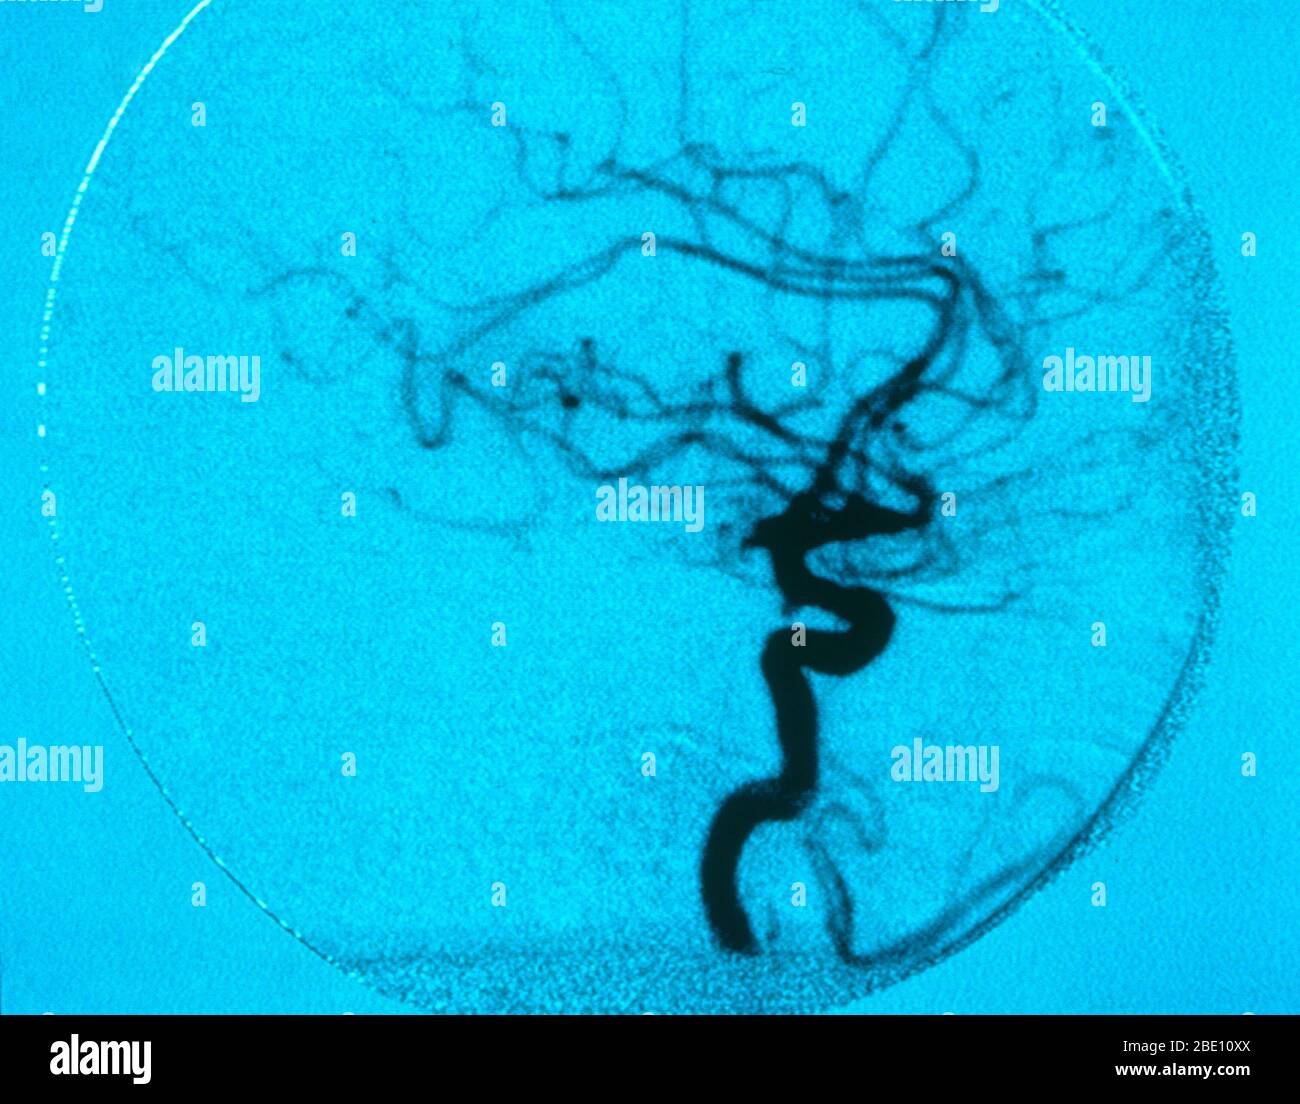 Angiogram of cerebral blood vessels. Stock Photo